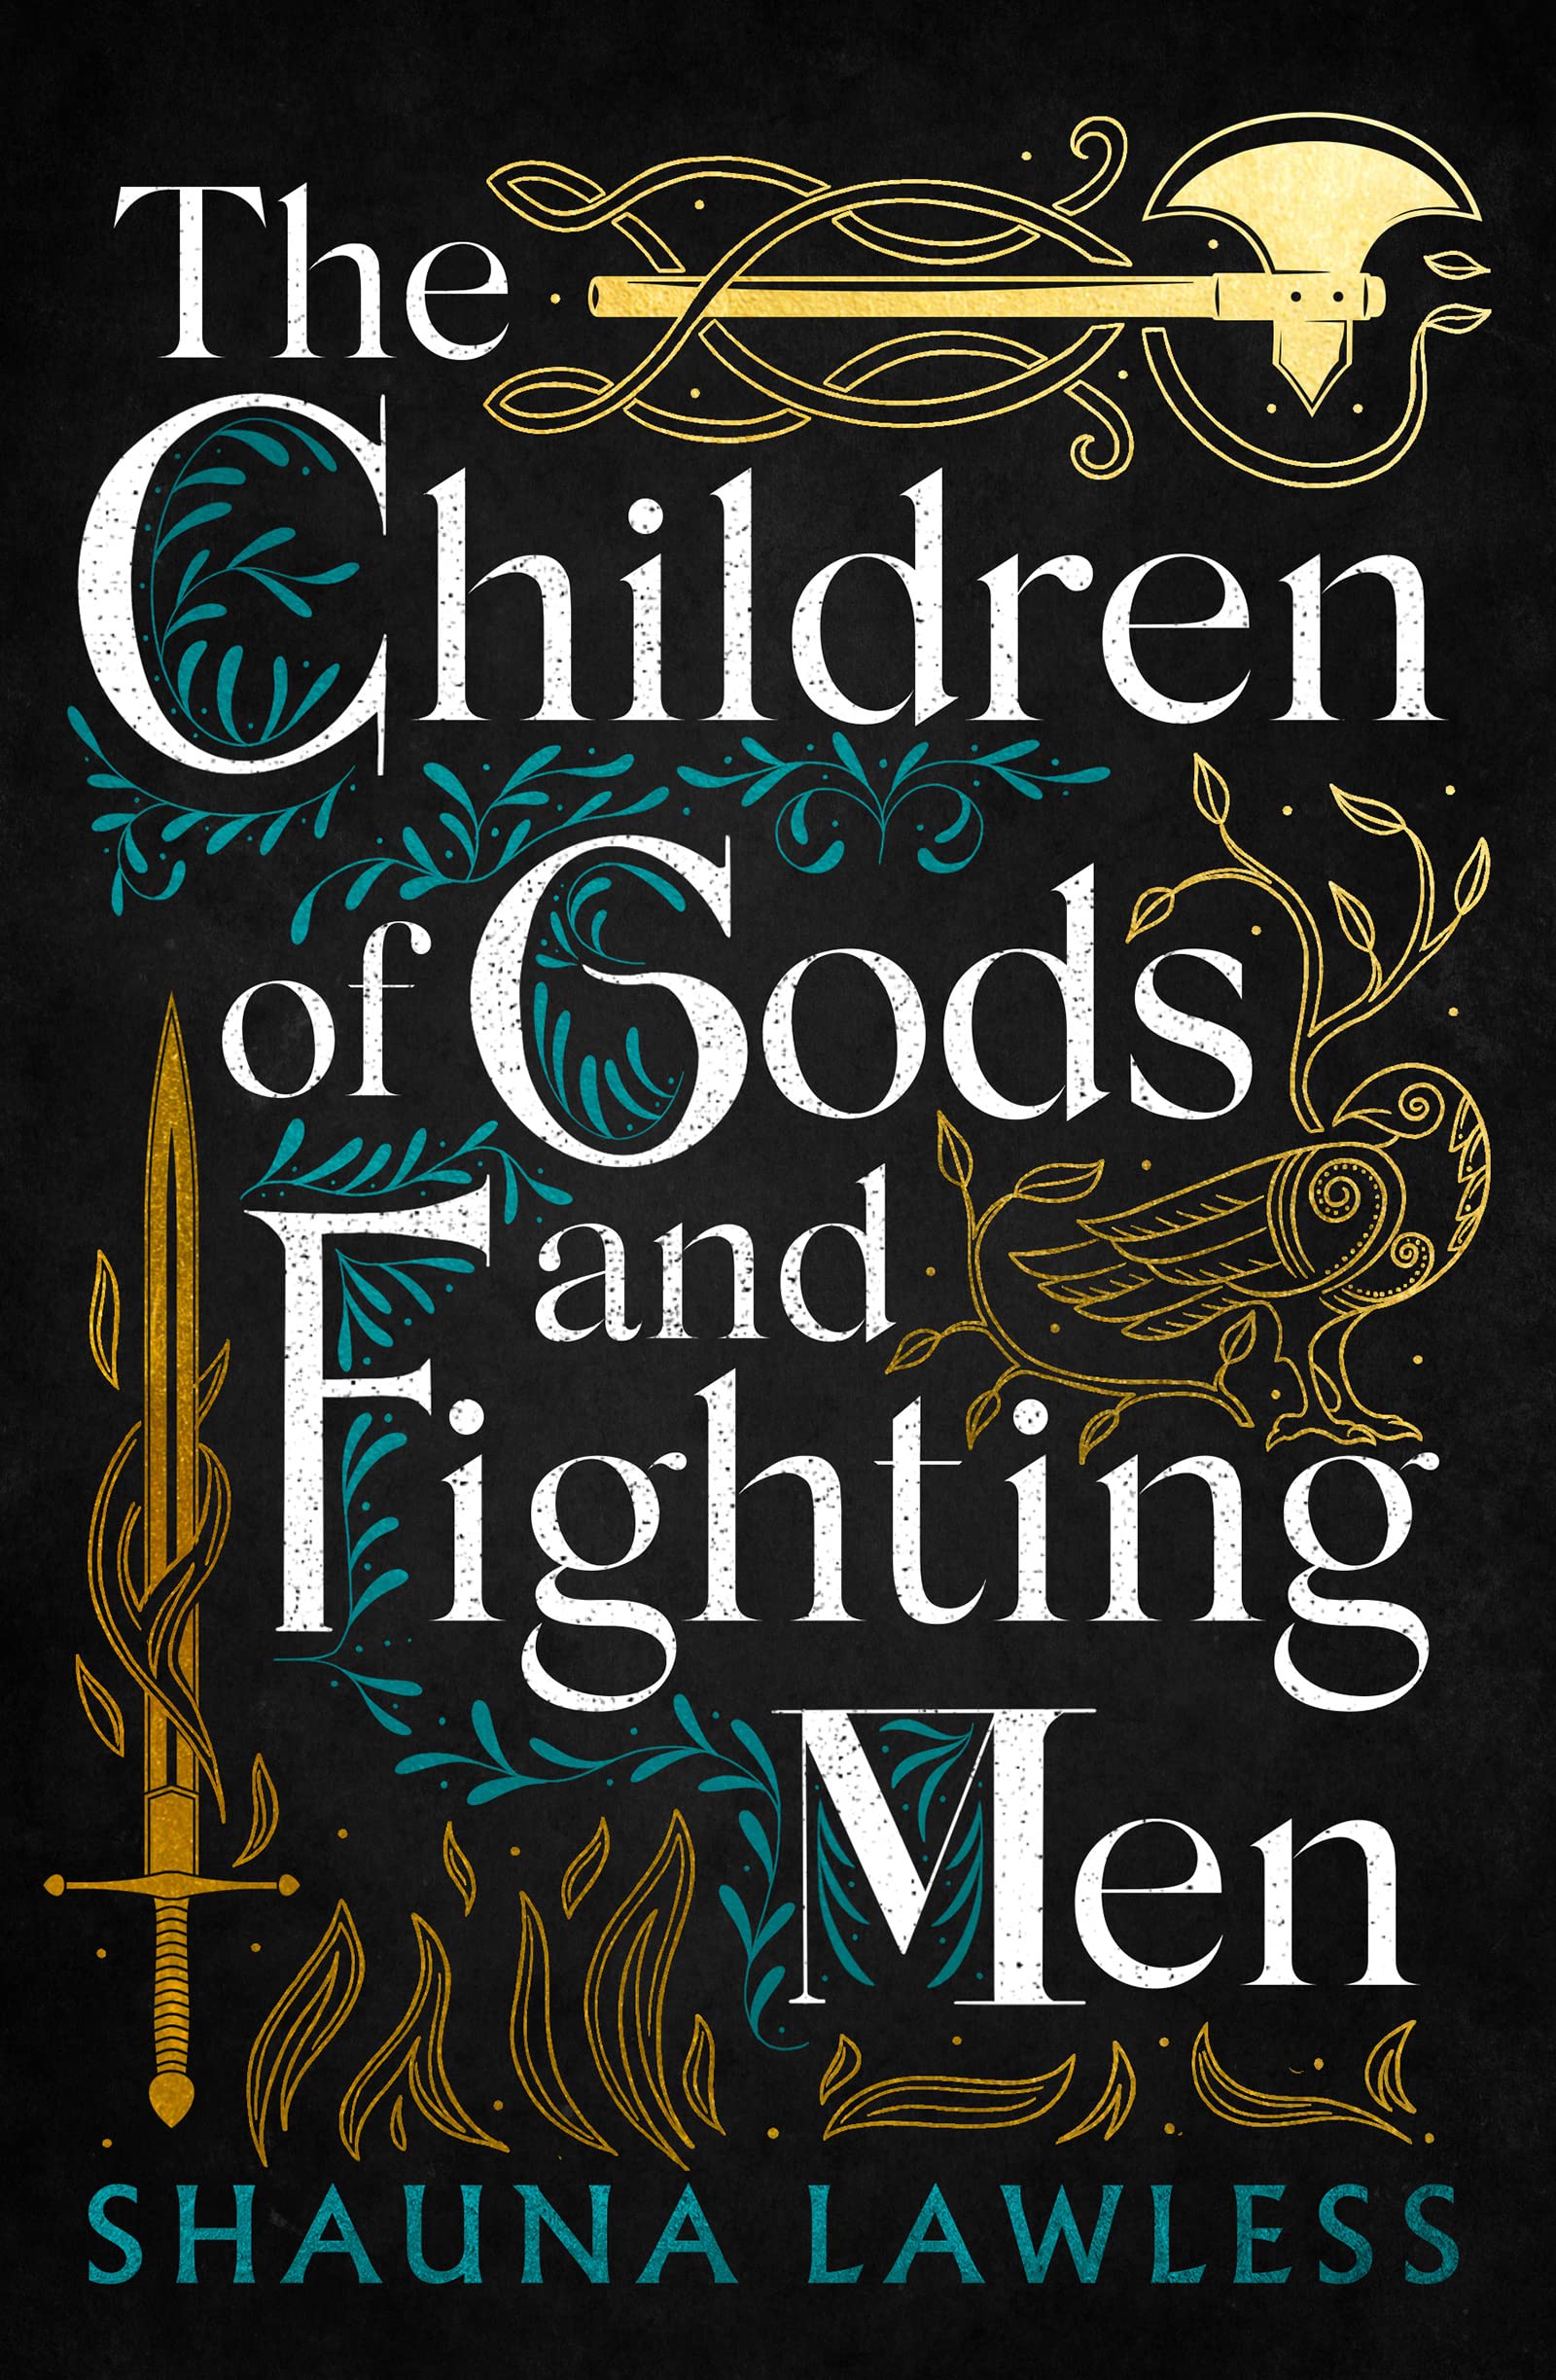 The Children of Gods and Fighting Men by Shauna Lawless